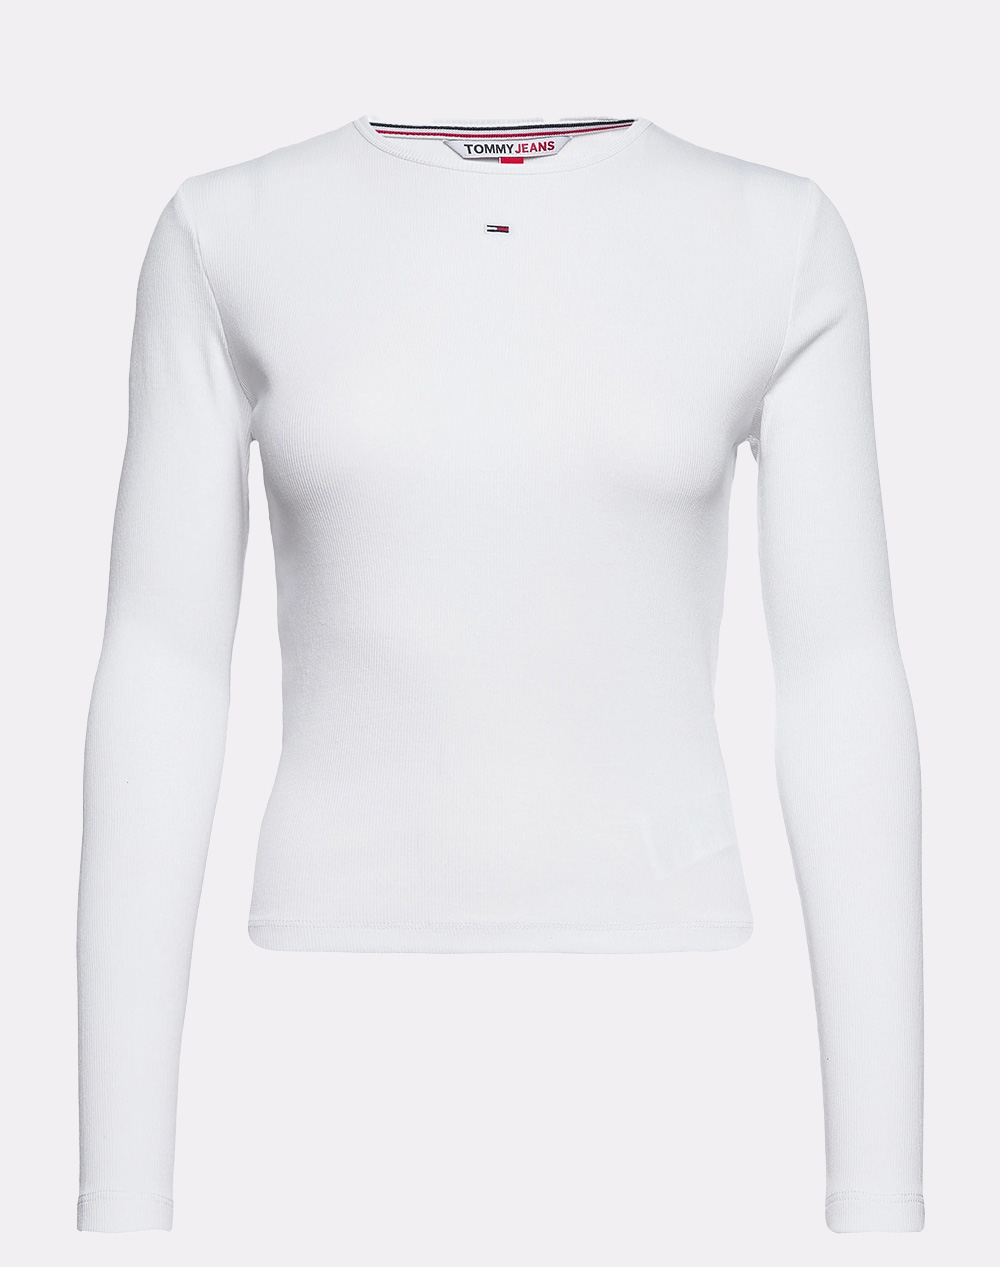 TOMMY JEANS TJW BABY RIB JERSEY C-NECK LONG-SLEEVED TEE - White